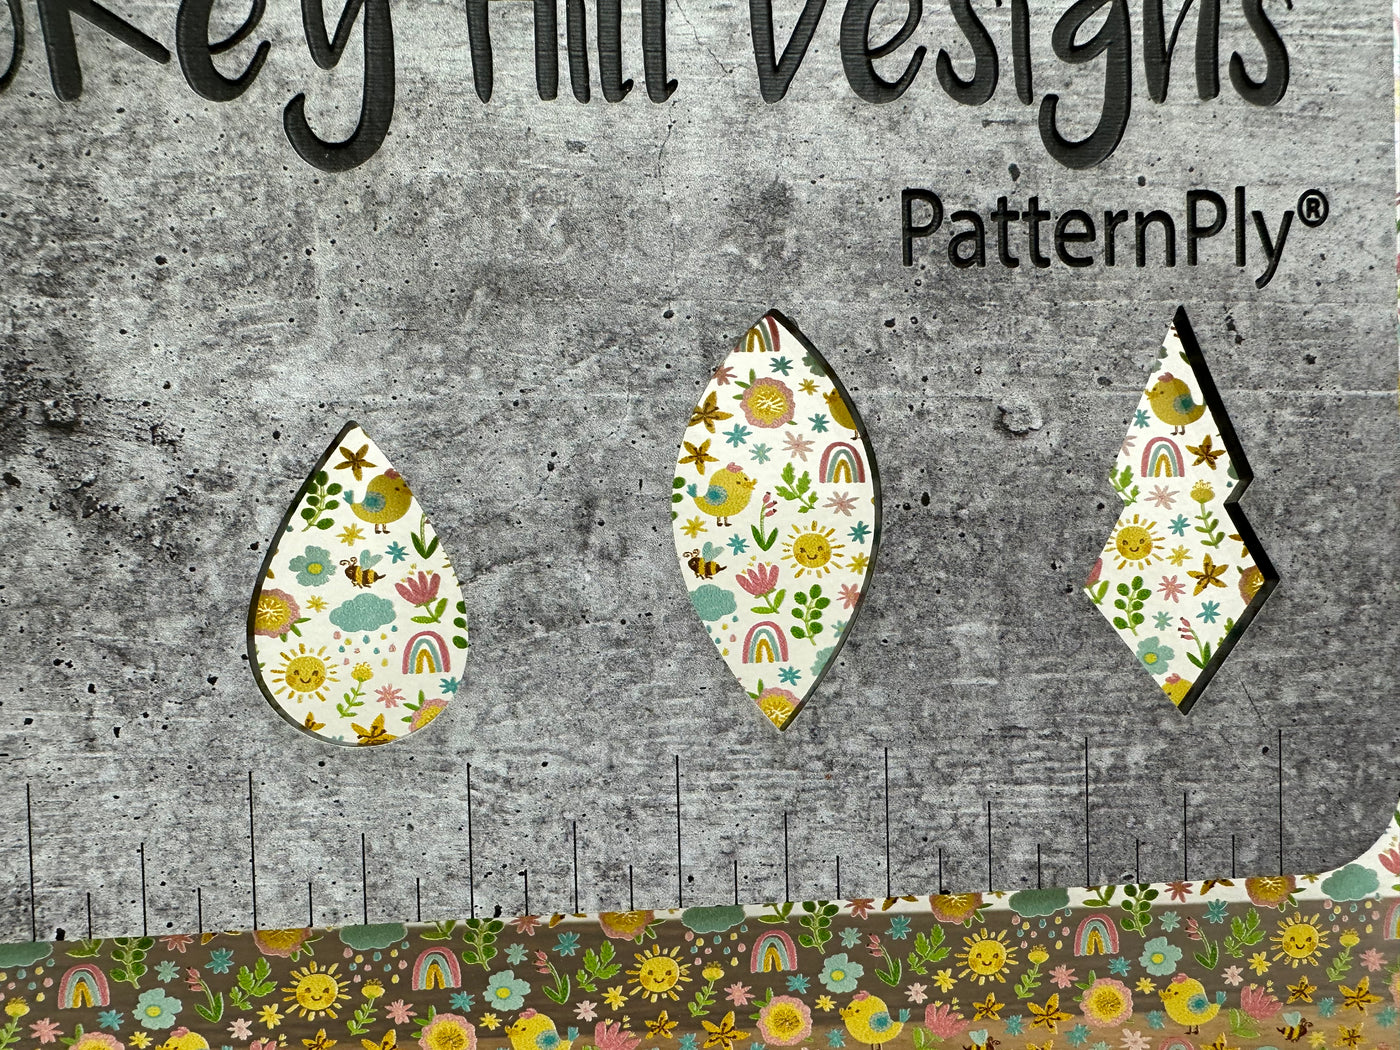 PatternPly® Scattered Spring Showers and Flowers